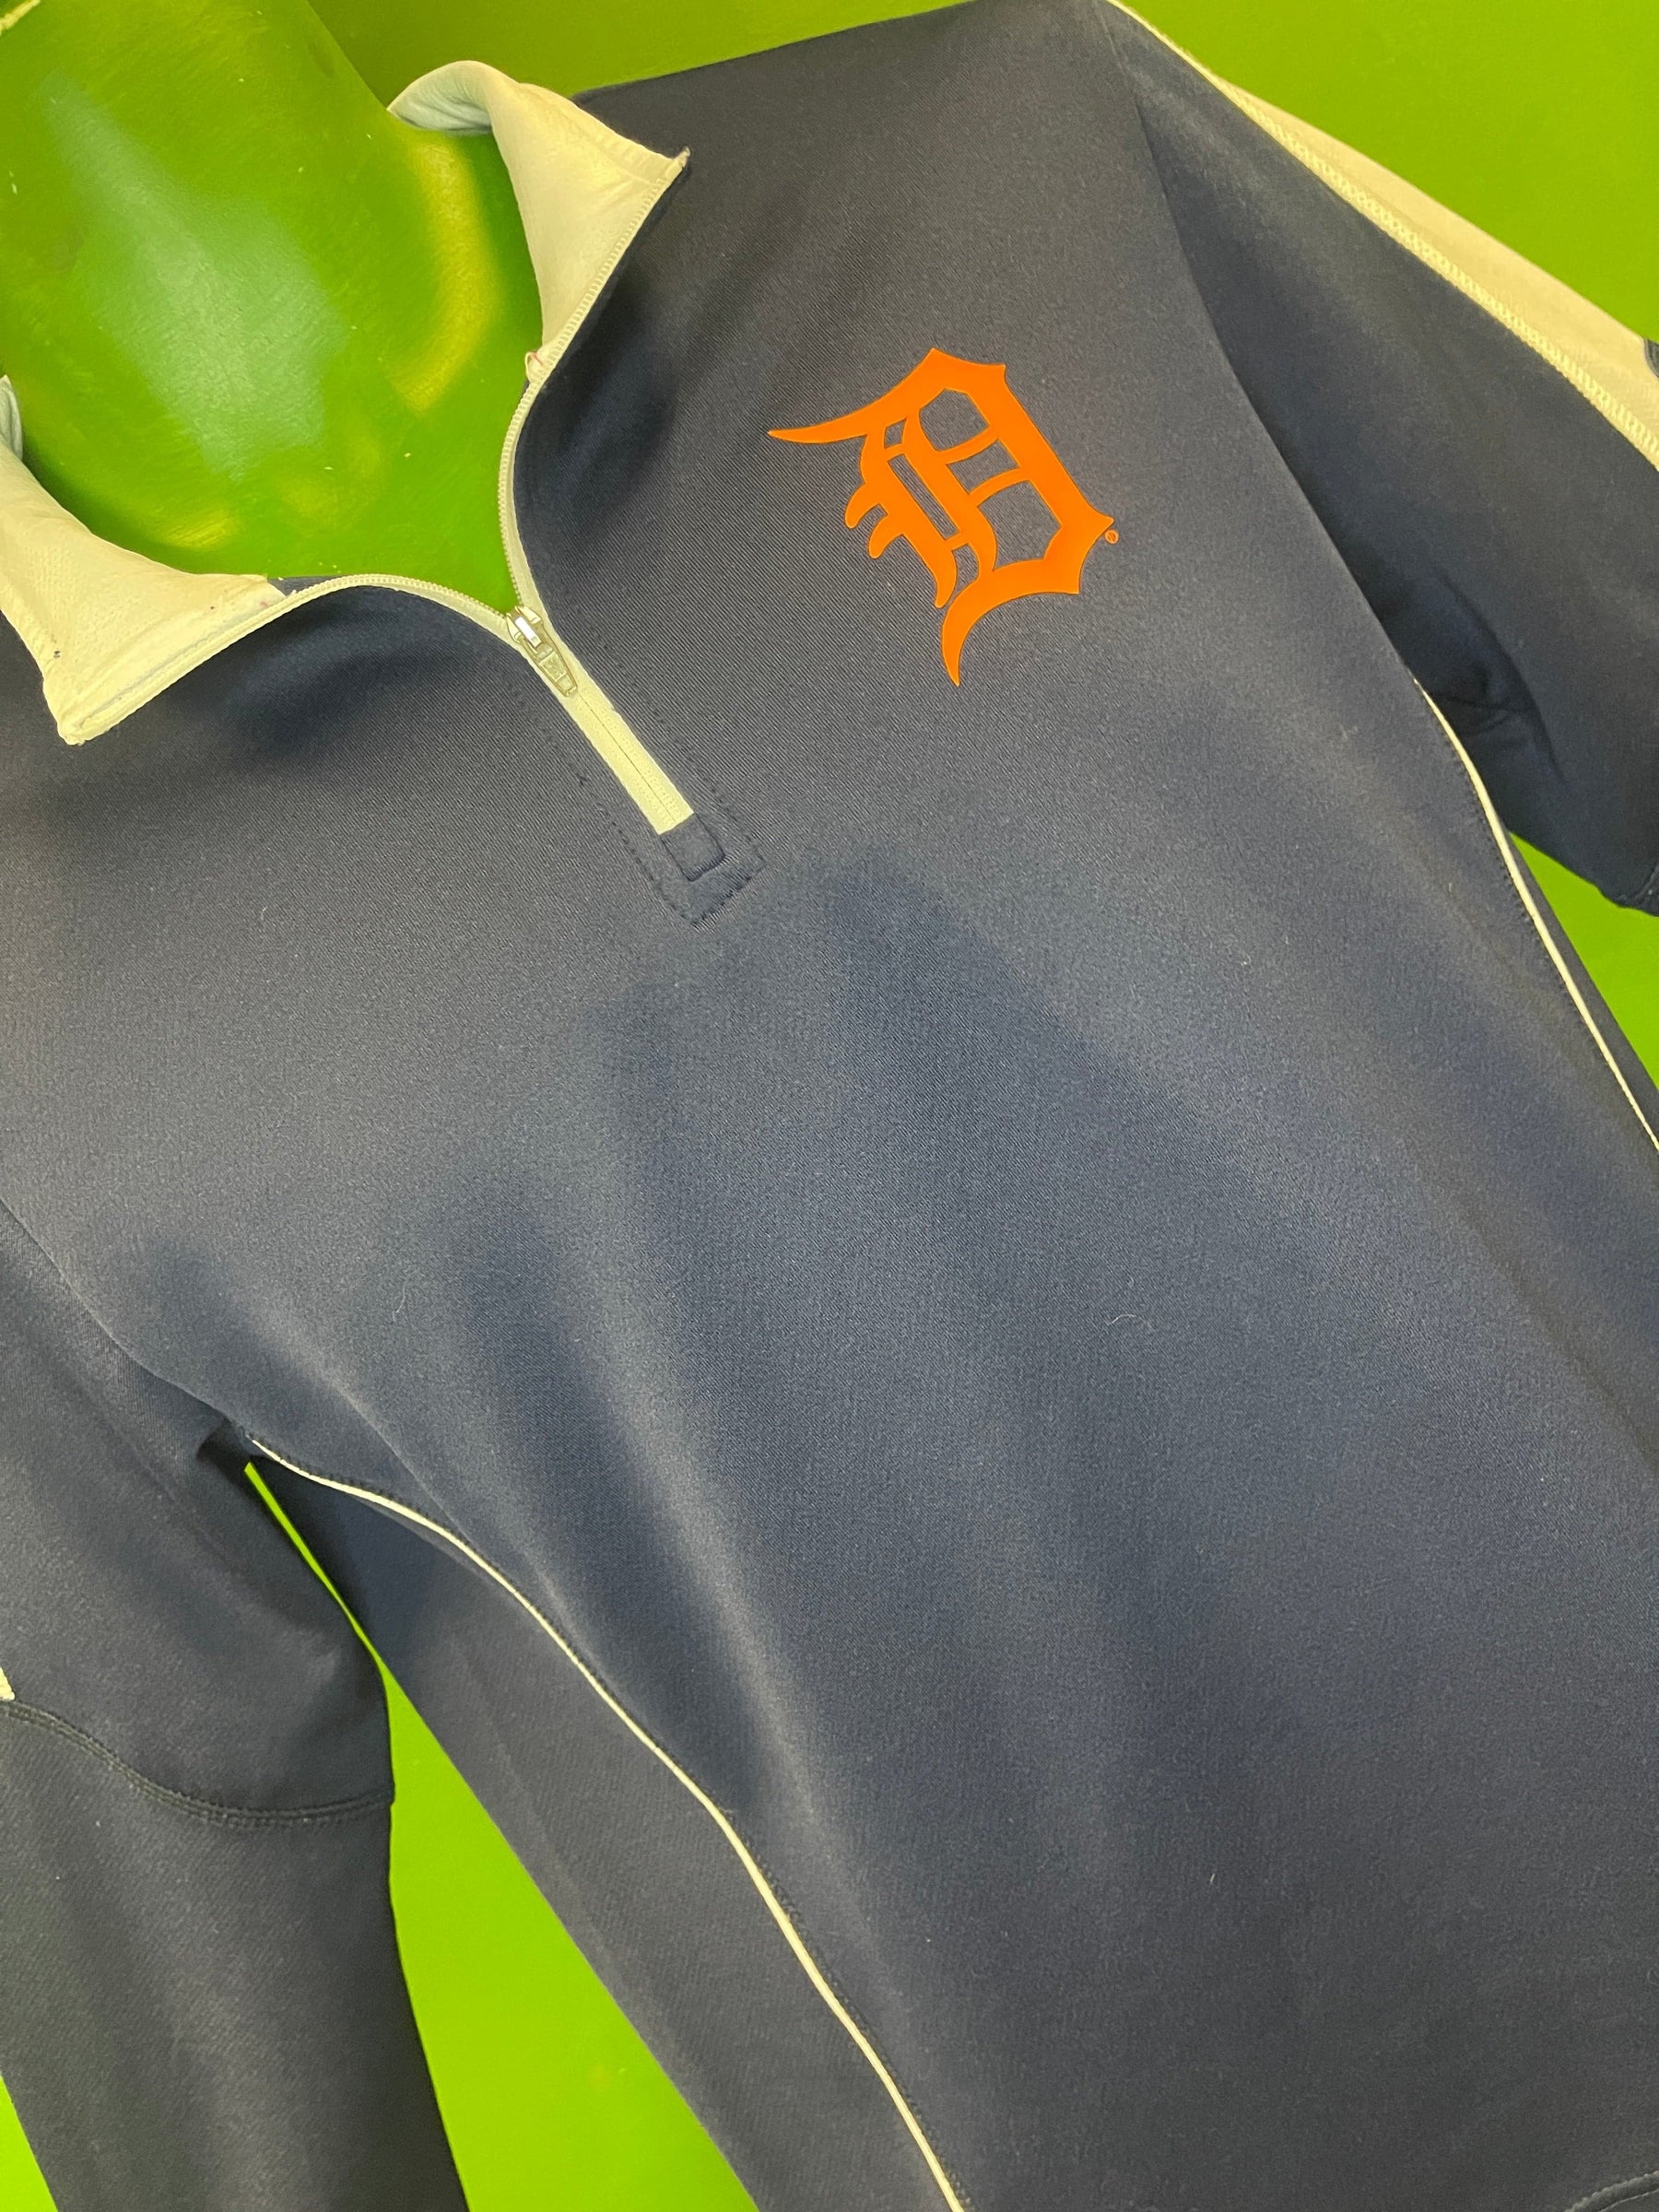 MLB Detroit Tigers Majestic 1/4 Zip Pullover Top Youth Large 14-16